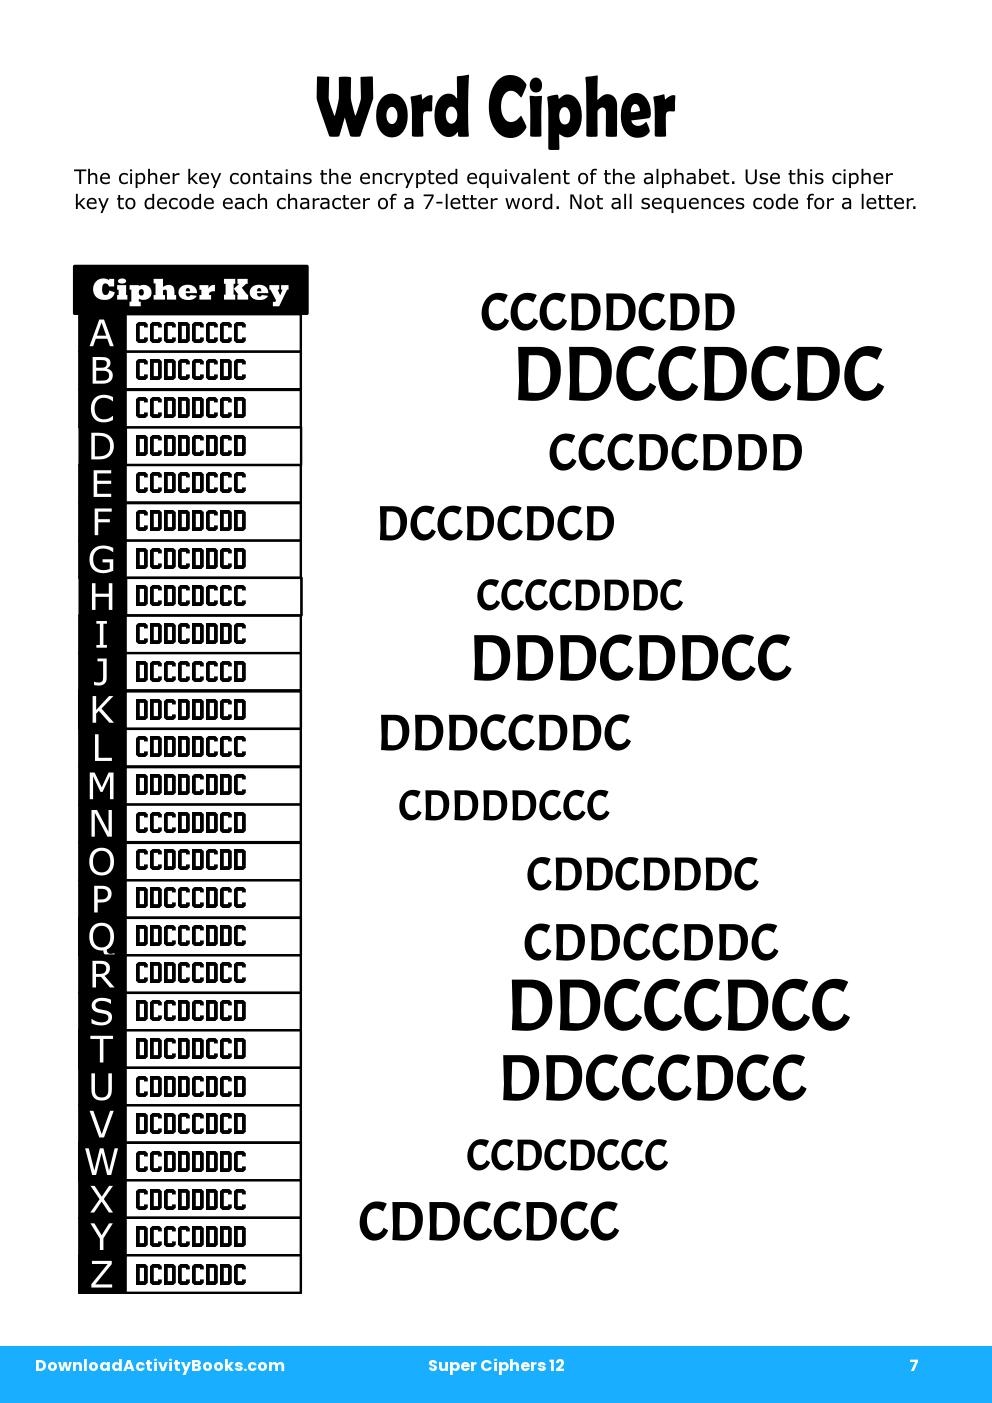 Word Cipher in Super Ciphers 12